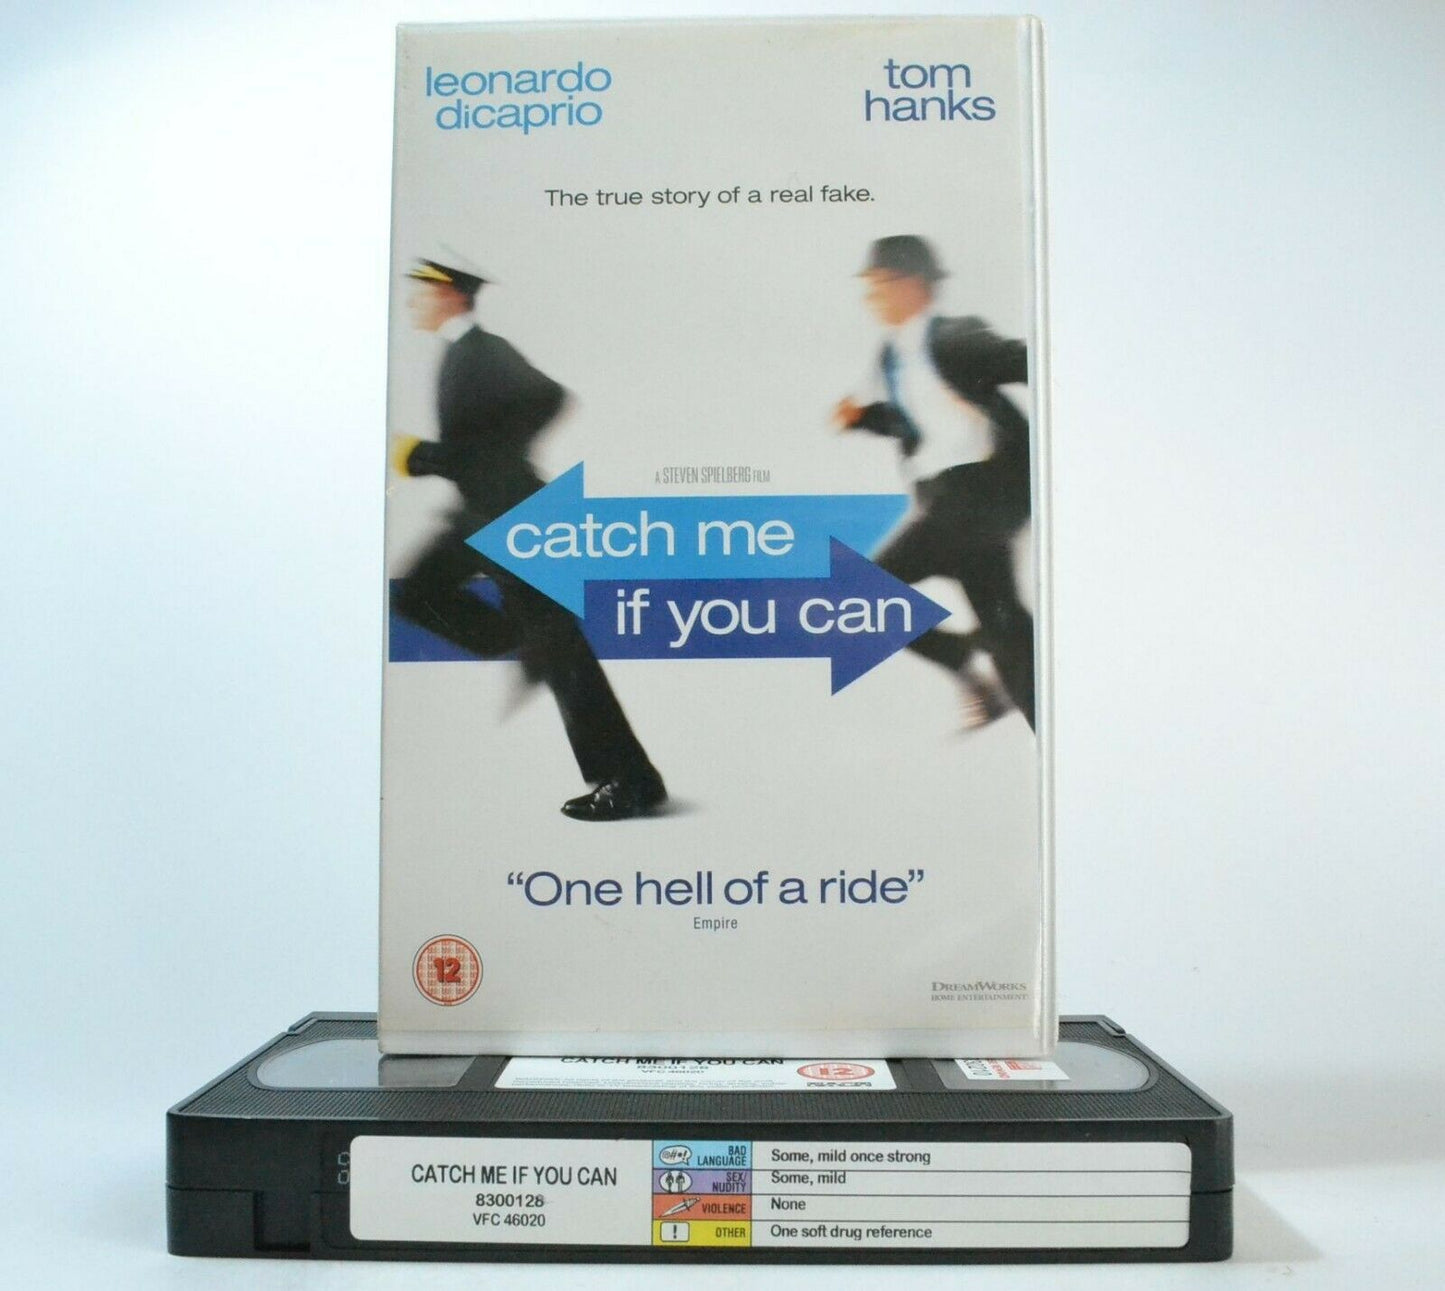 Catch Me If You Can: Based On True Story - Large Box - L.DiCaprio/T.Hanks - VHS-